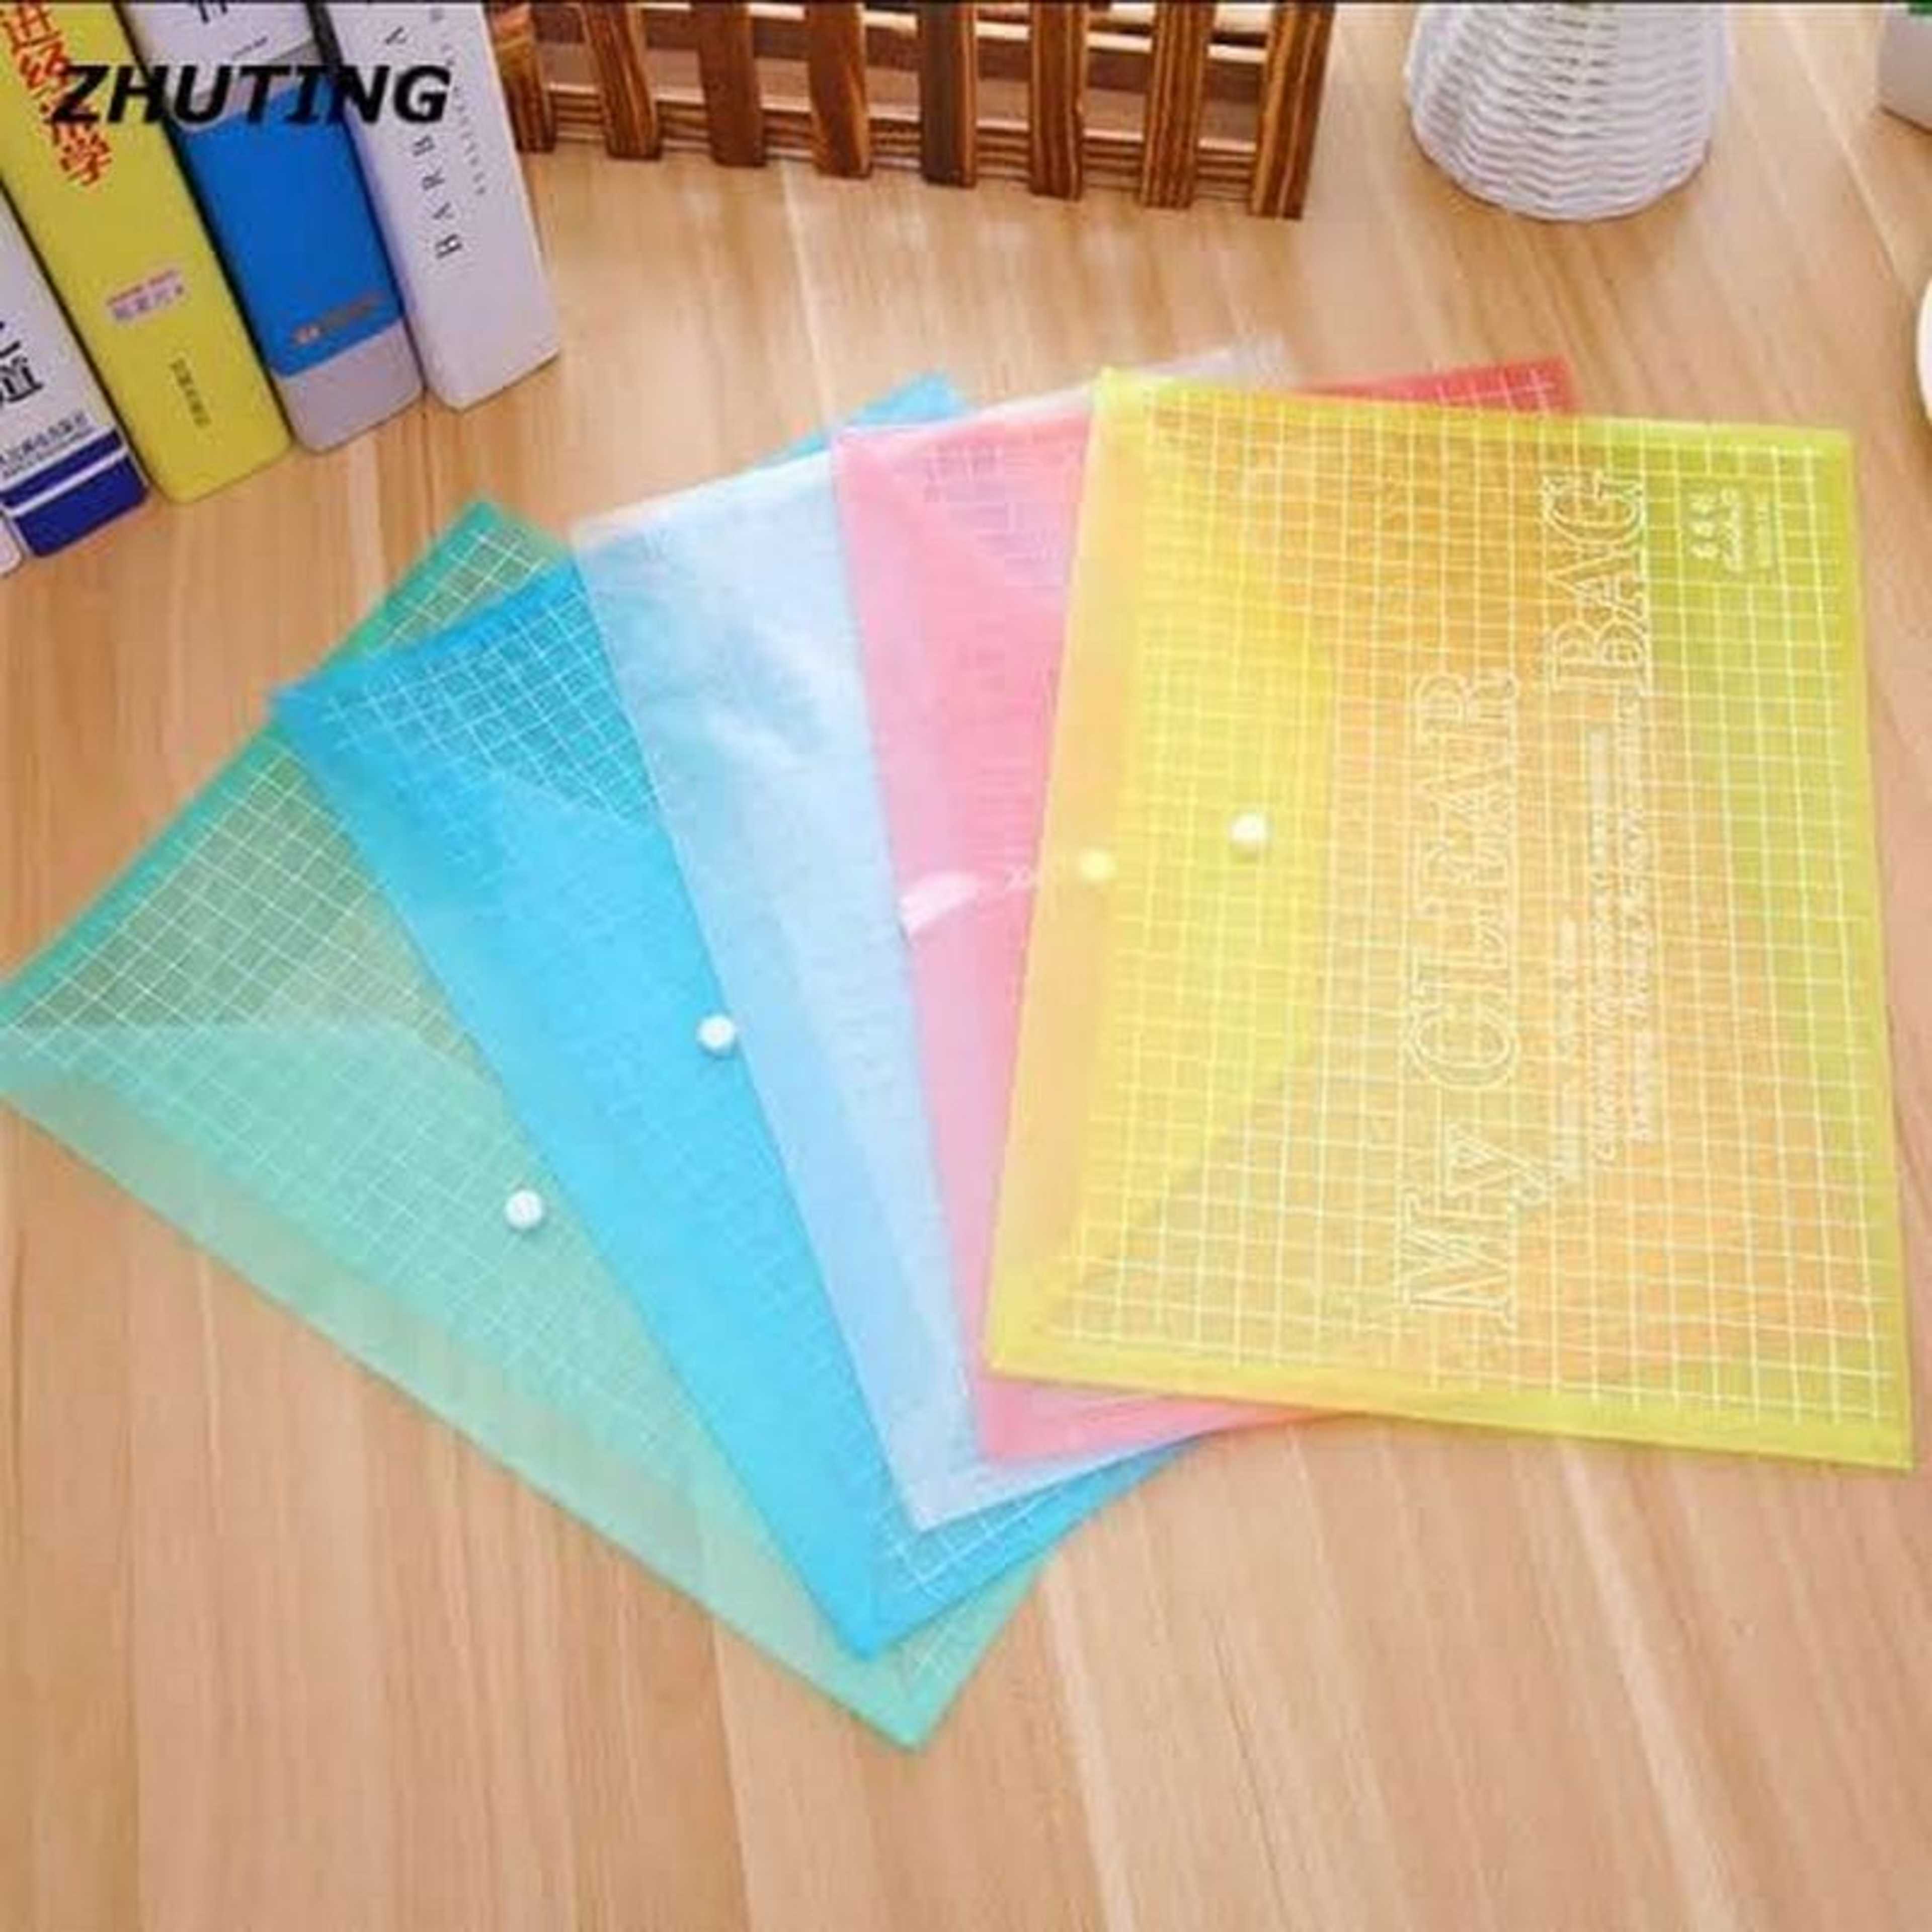 Pack of 12 - Random Color Plastic Clear Bag A4 Size Documents File, A4 Document Organizer, Plastic Folders for File,Transparent My Clear Bag,Office Supplies File Folders for School and Office